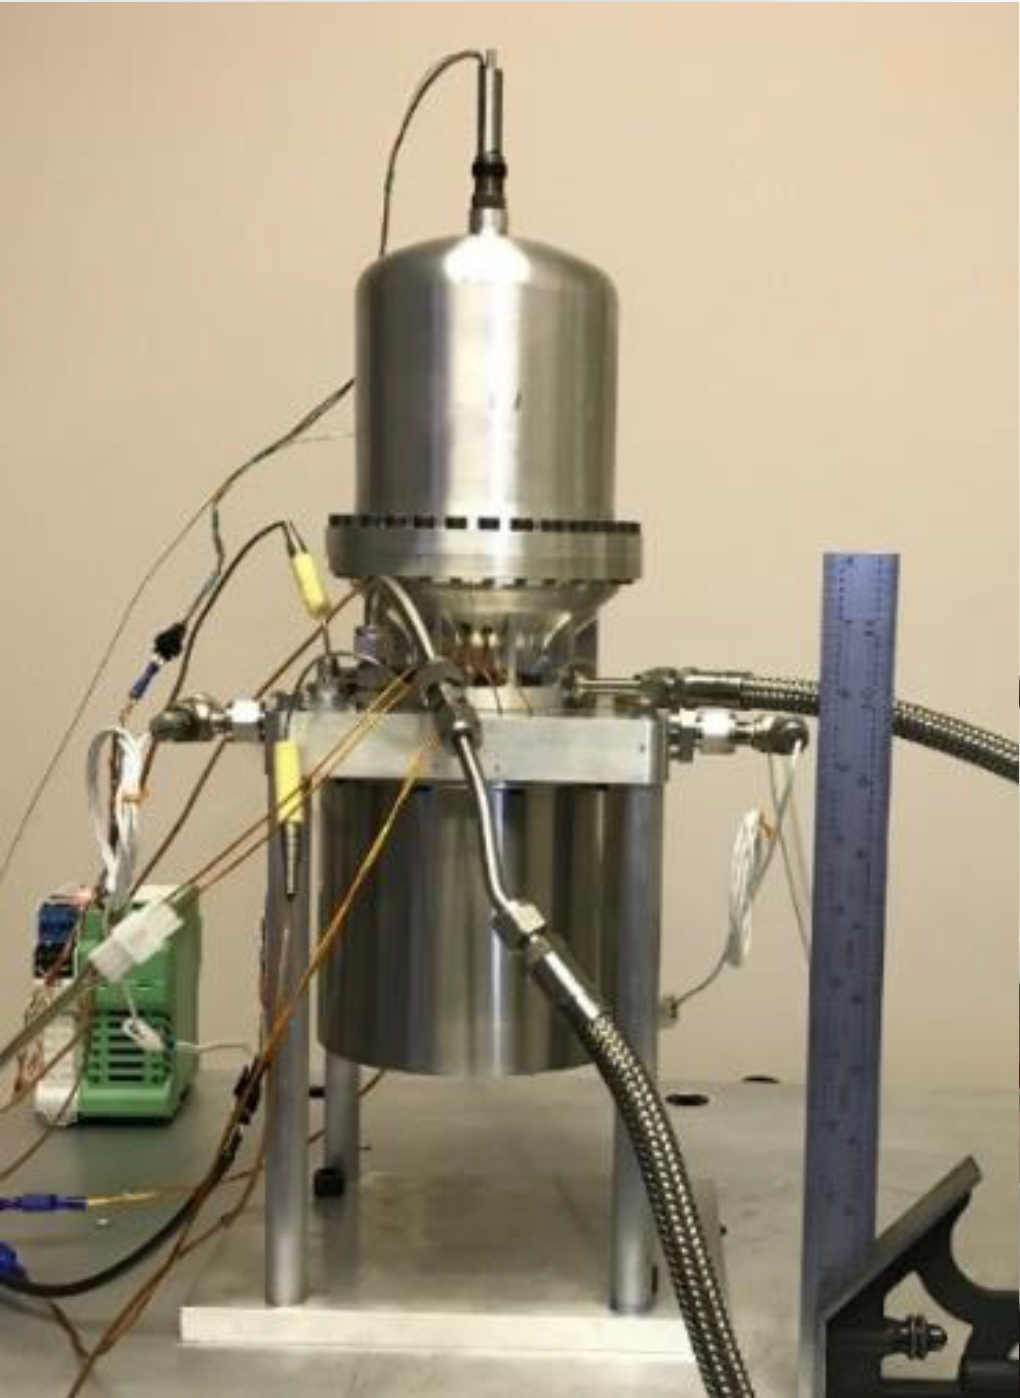 An American Superconductor free-piston Stirling Convertor.